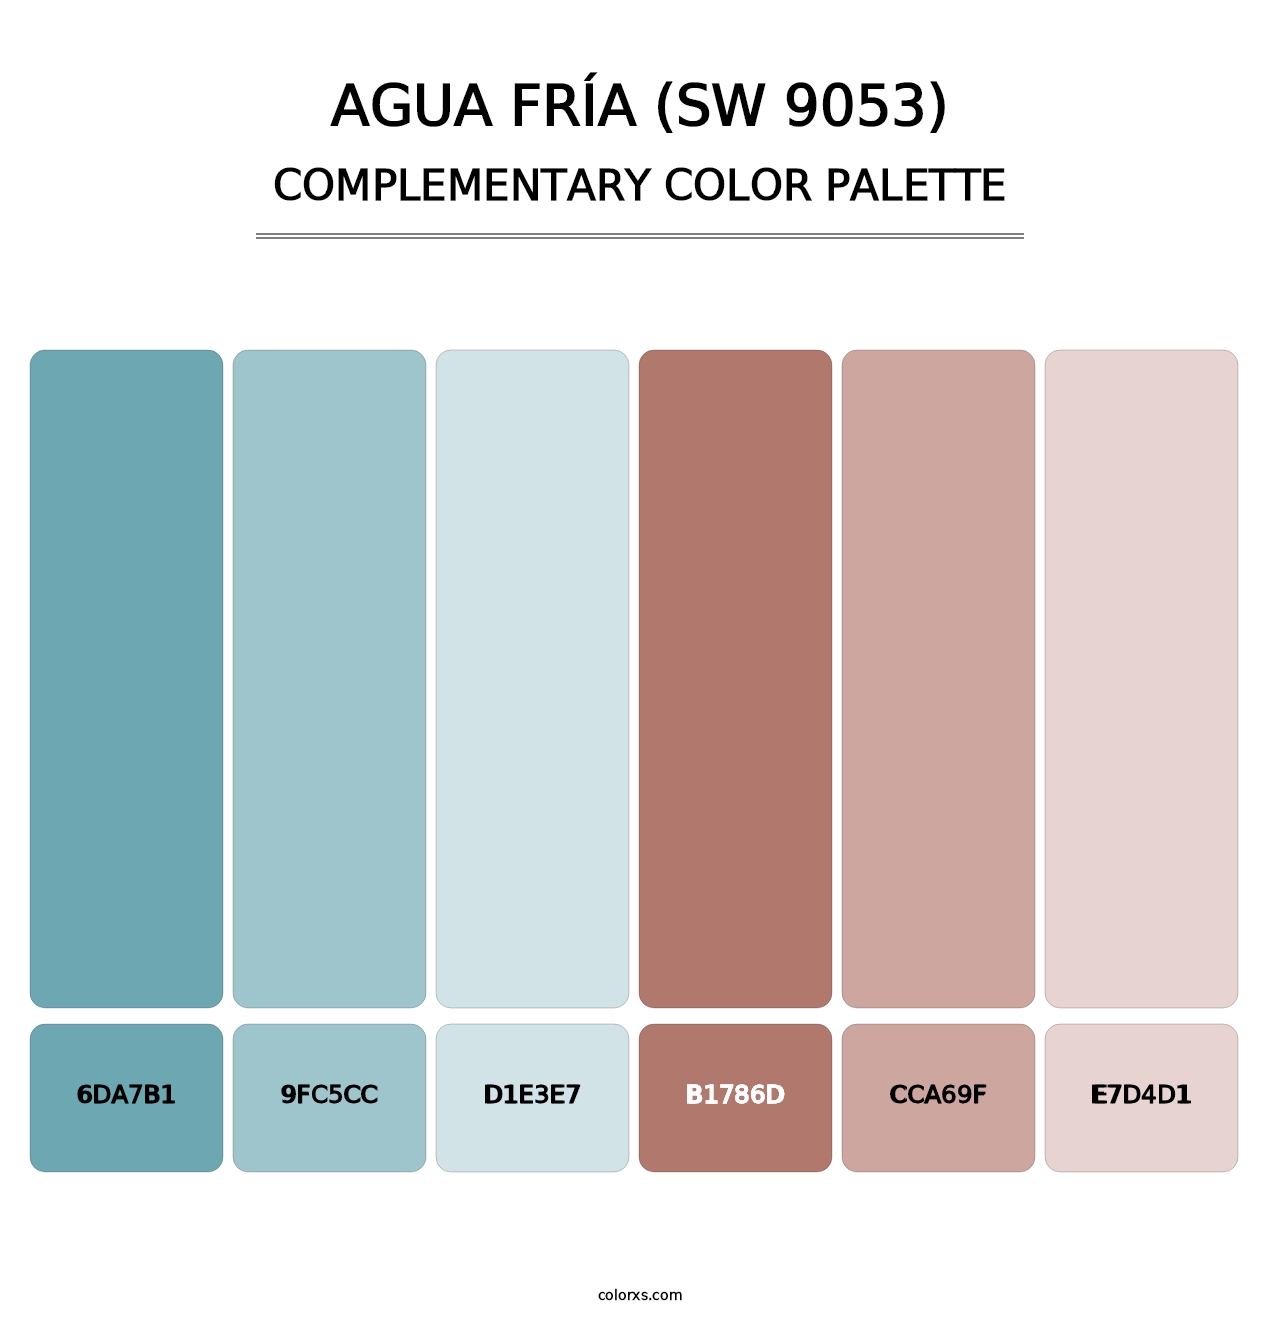 Agua Fría (SW 9053) - Complementary Color Palette